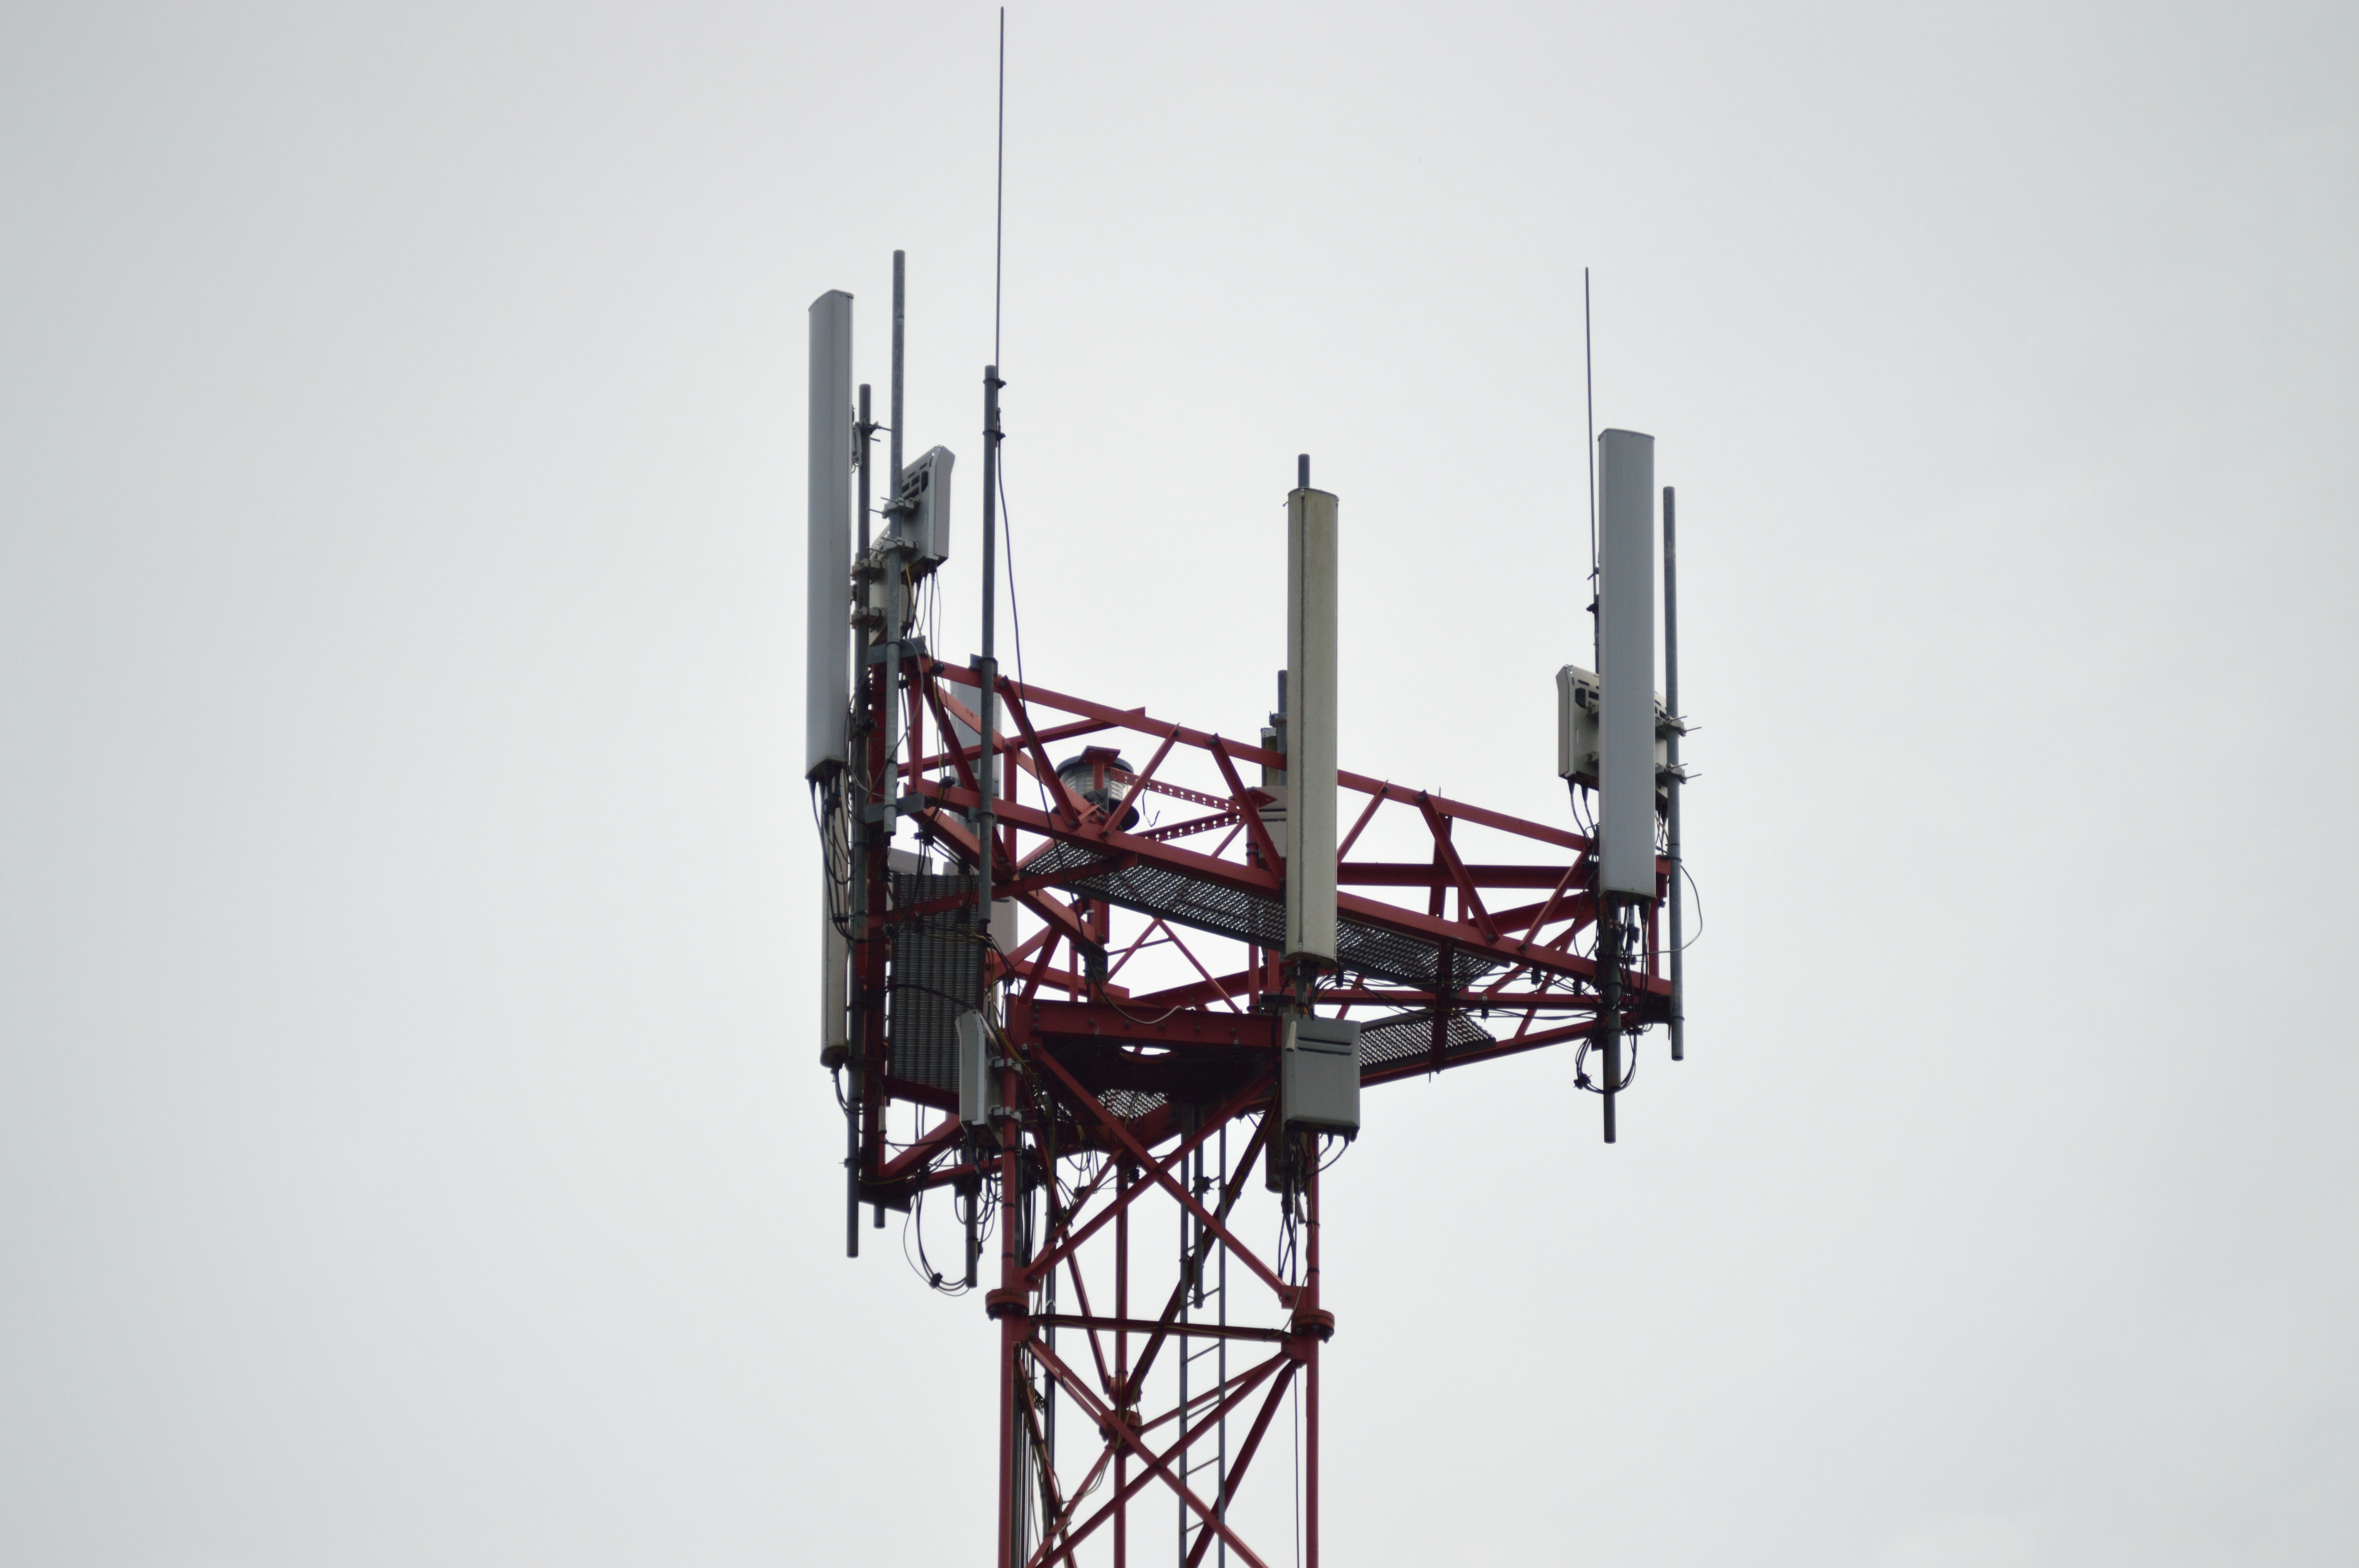 Should we be concerned about local cell towers?